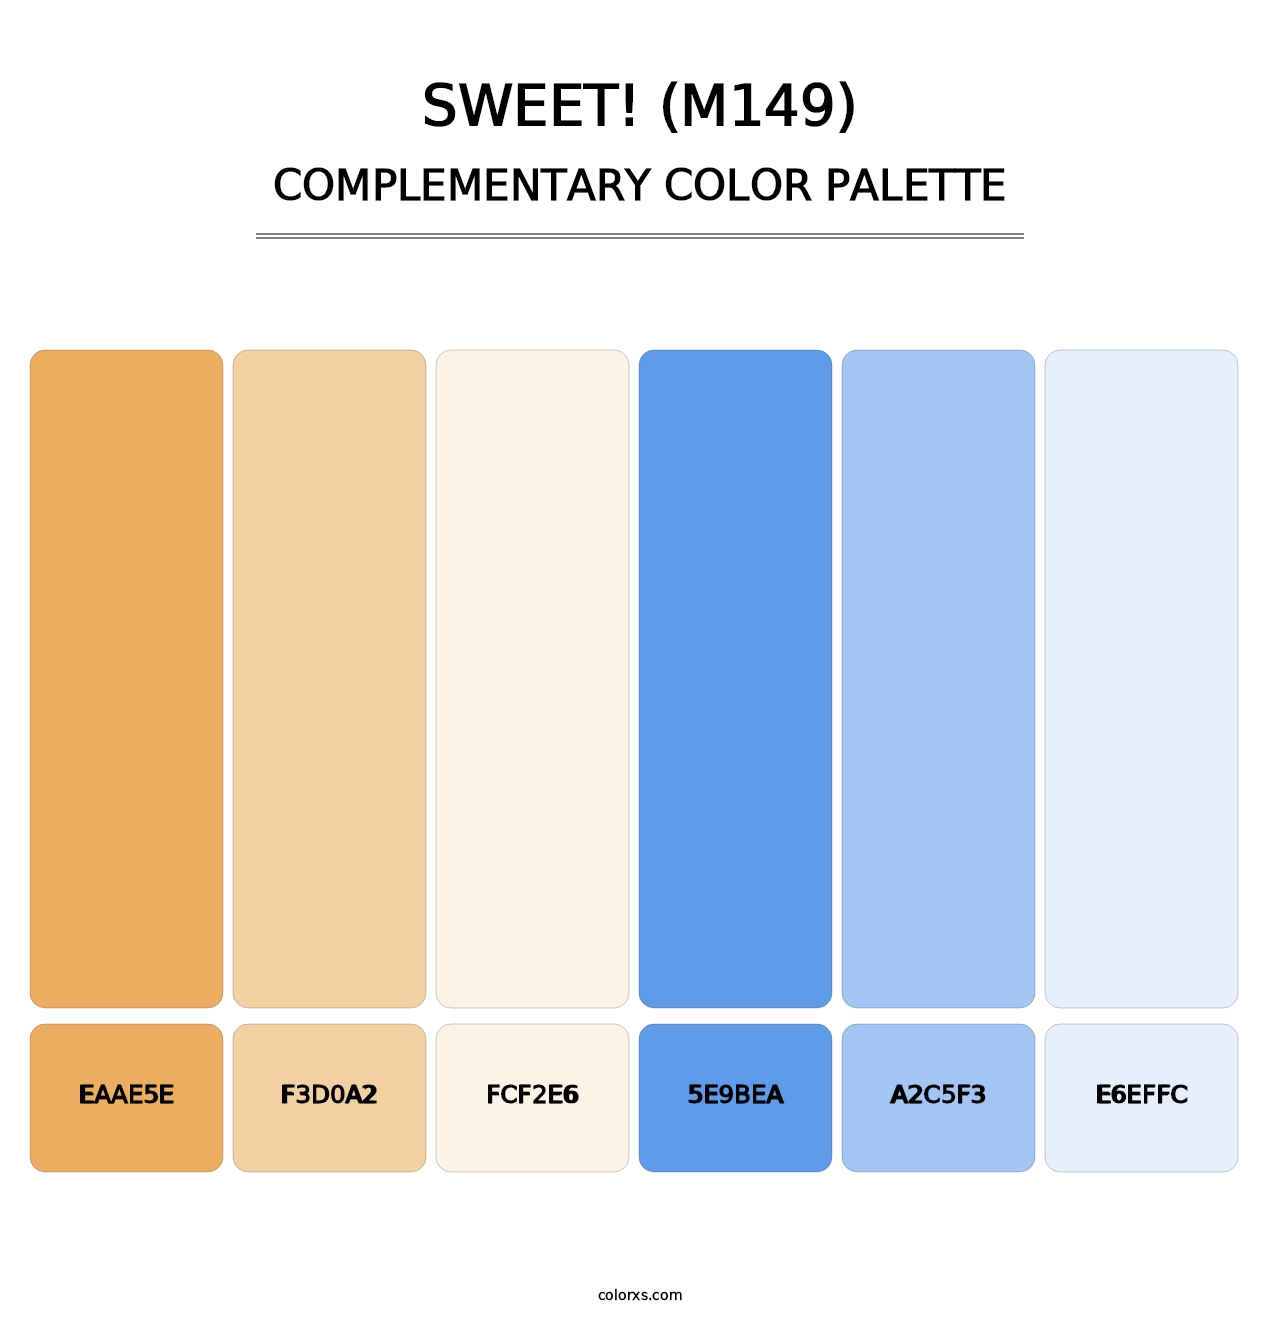 sweet! (M149) - Complementary Color Palette